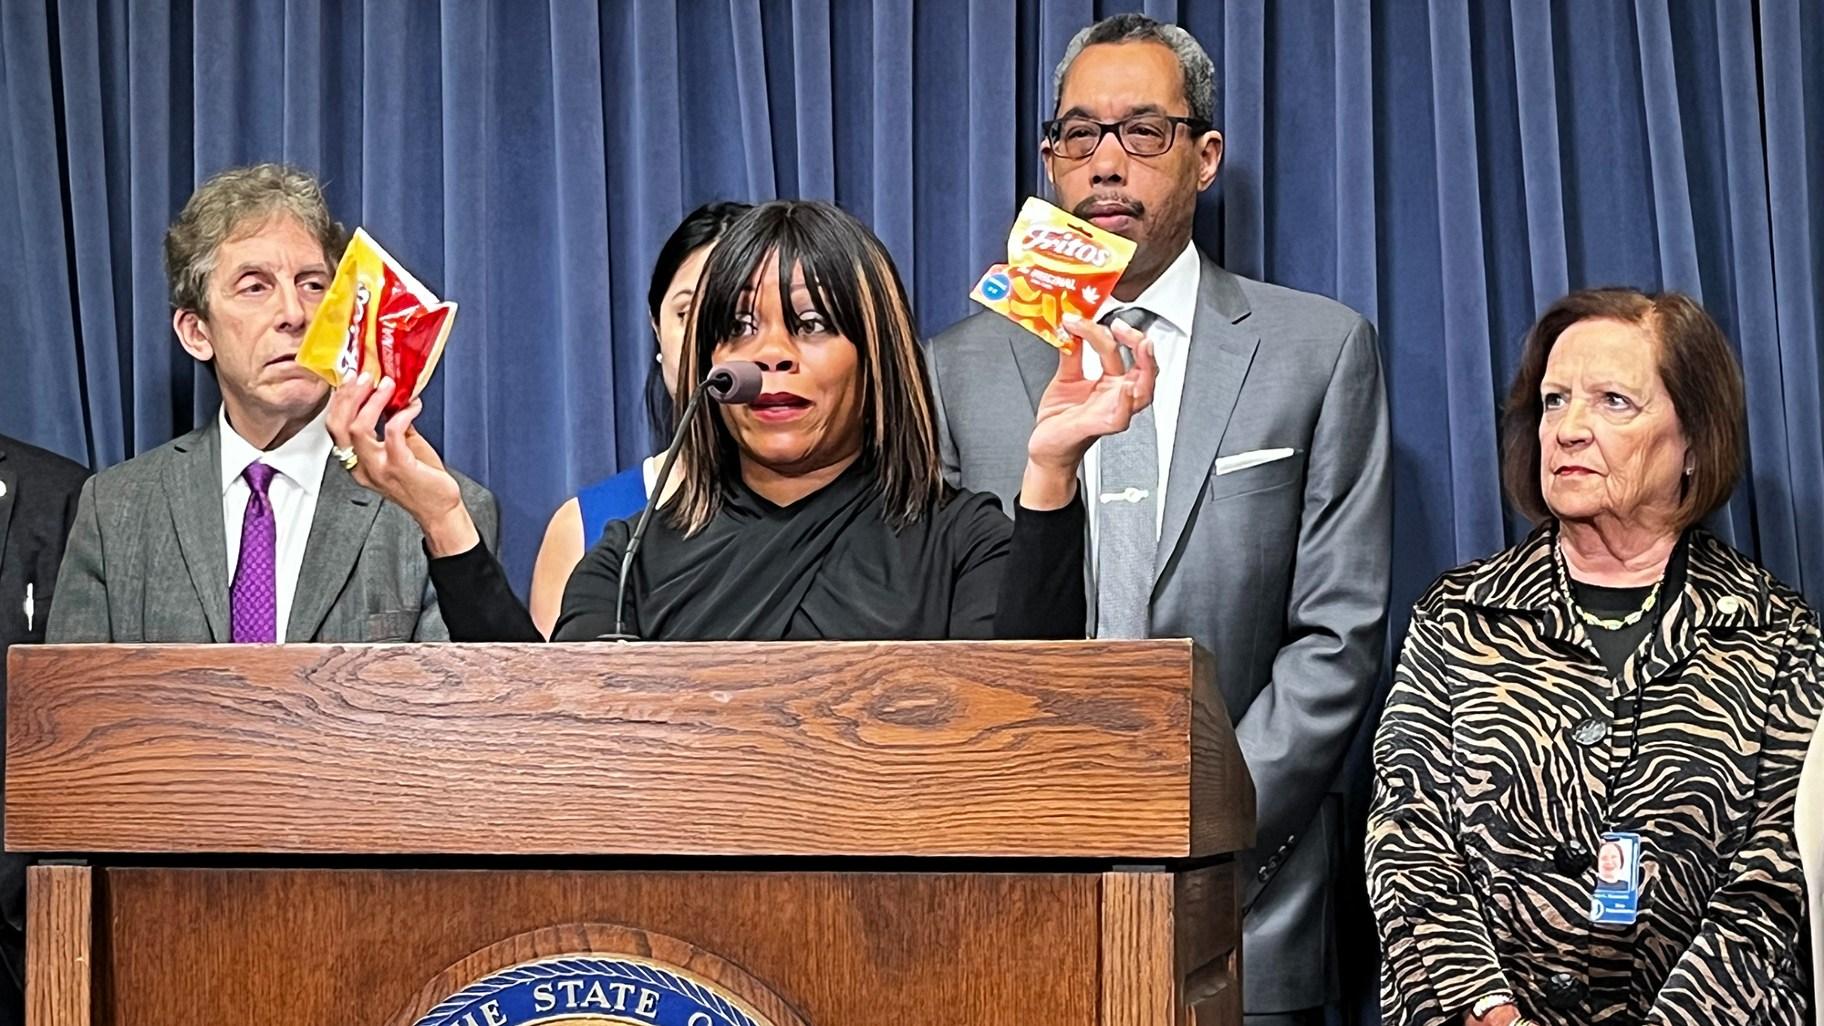 Cannabis Business Association of Illinois Executive Director Tiffany Ingram holds up a bag of Fritos corn chips and a similar-looking bag of “Fritos” snacks with small cannabis leaves on it. CBAI is urging for the state to prohibit sales of delta-8 THC products like the imposter “Fritos.” (Hannah Meisel / Capitol News Illinois)